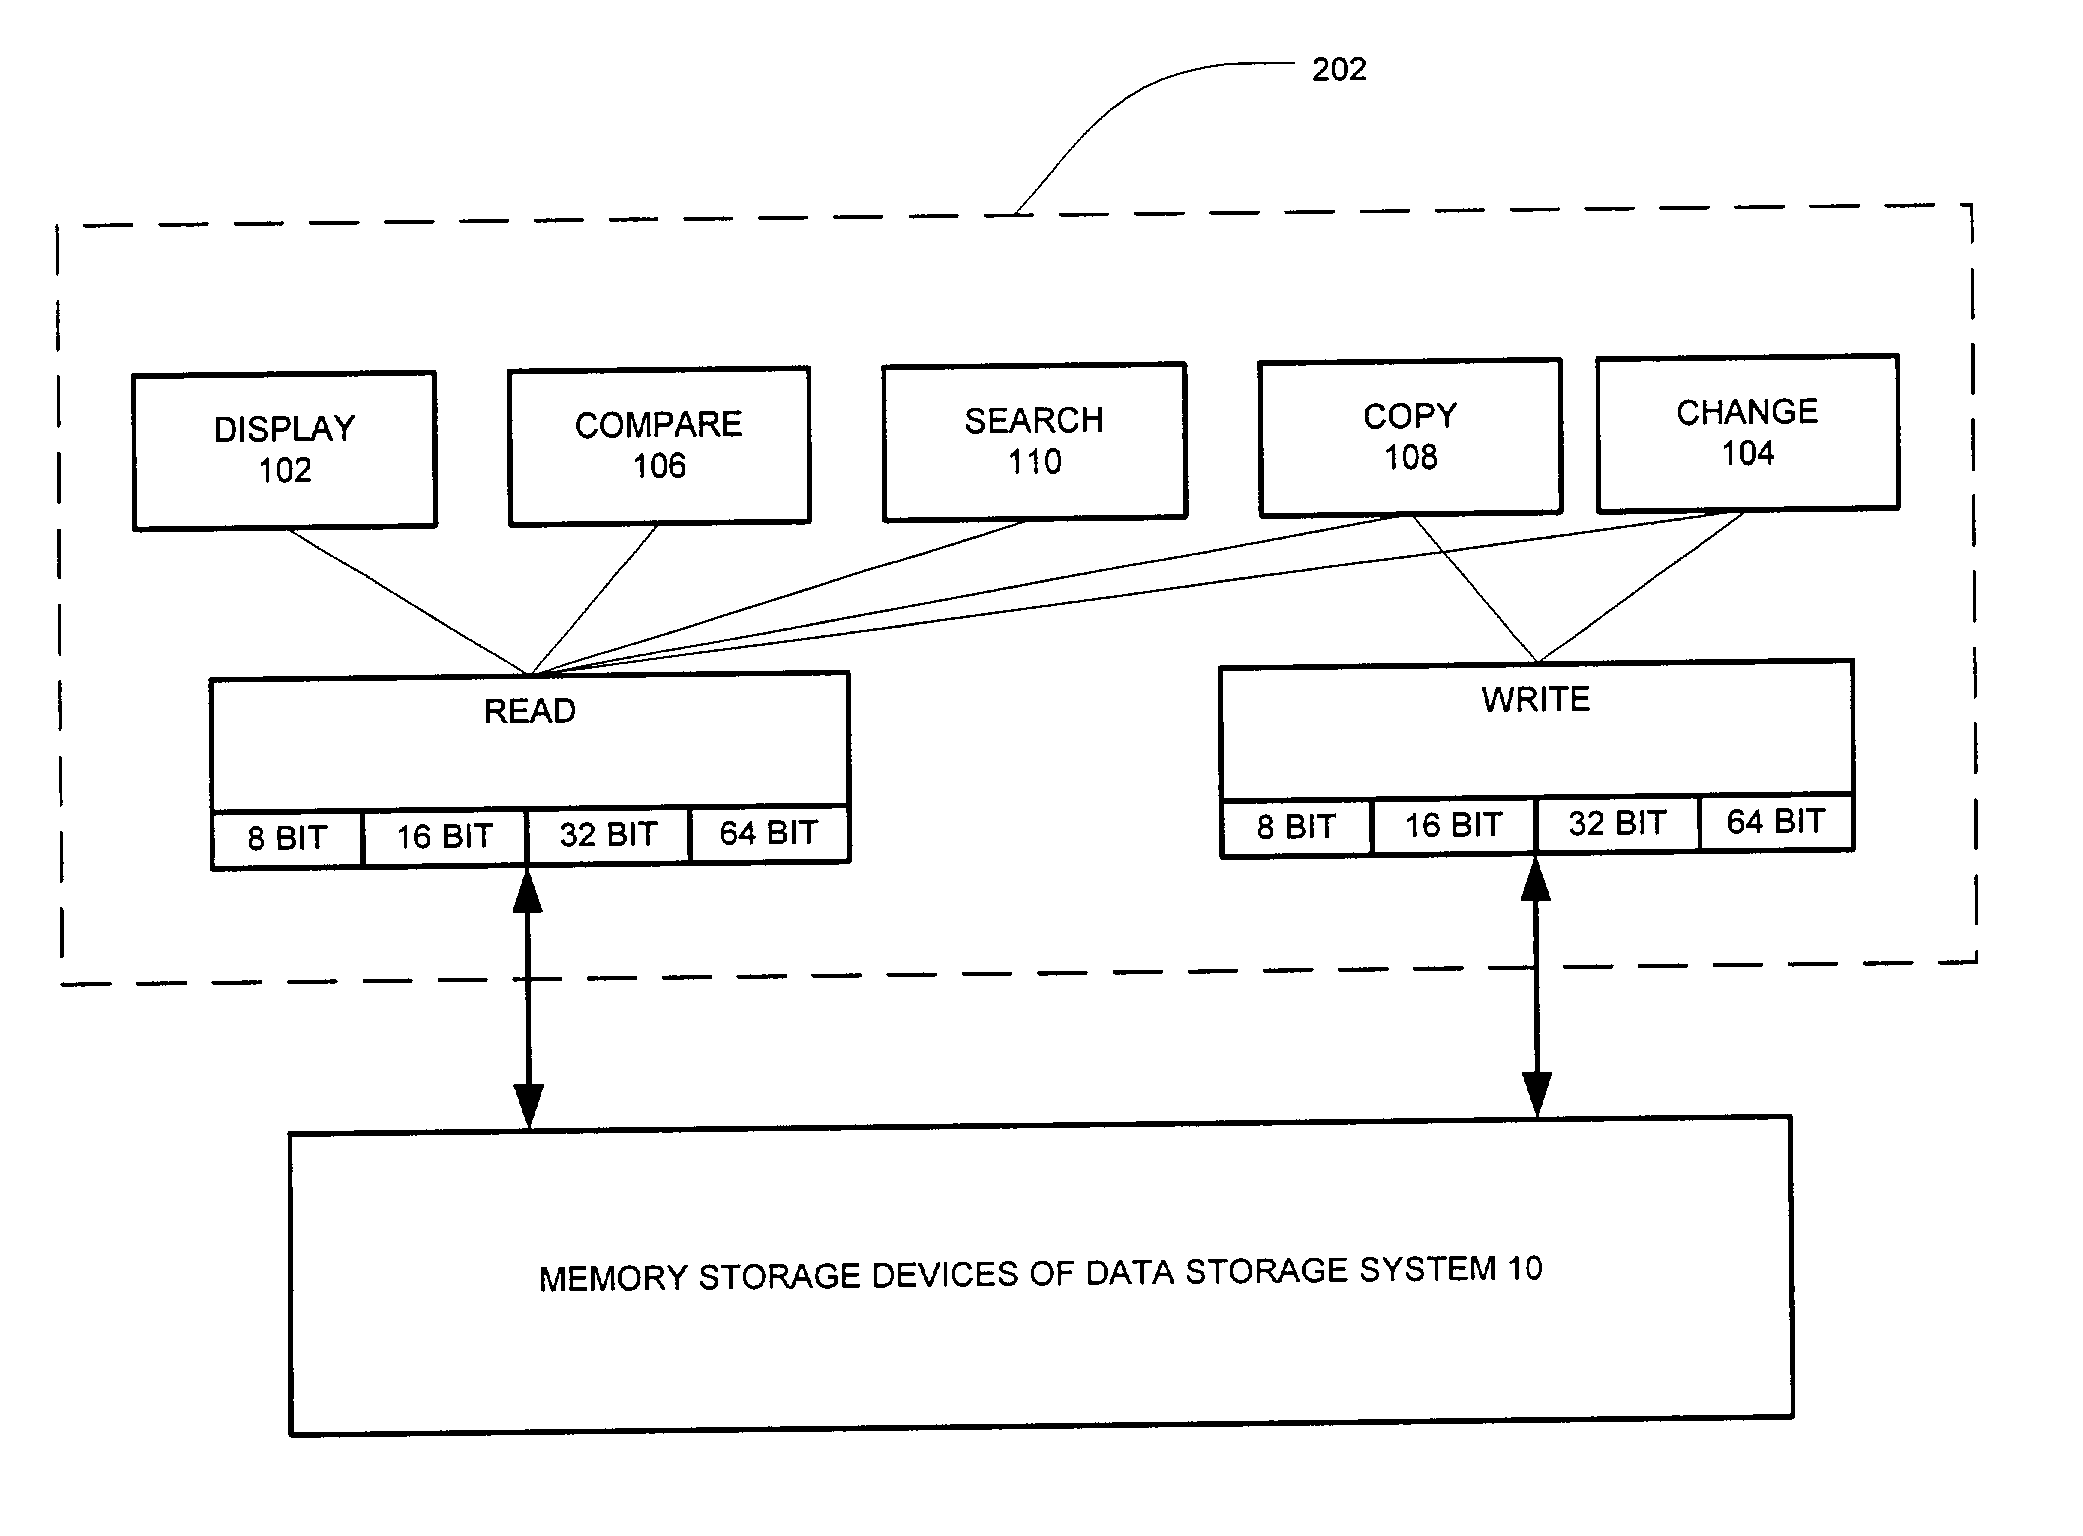 Universal diagnostic hardware space access system for firmware